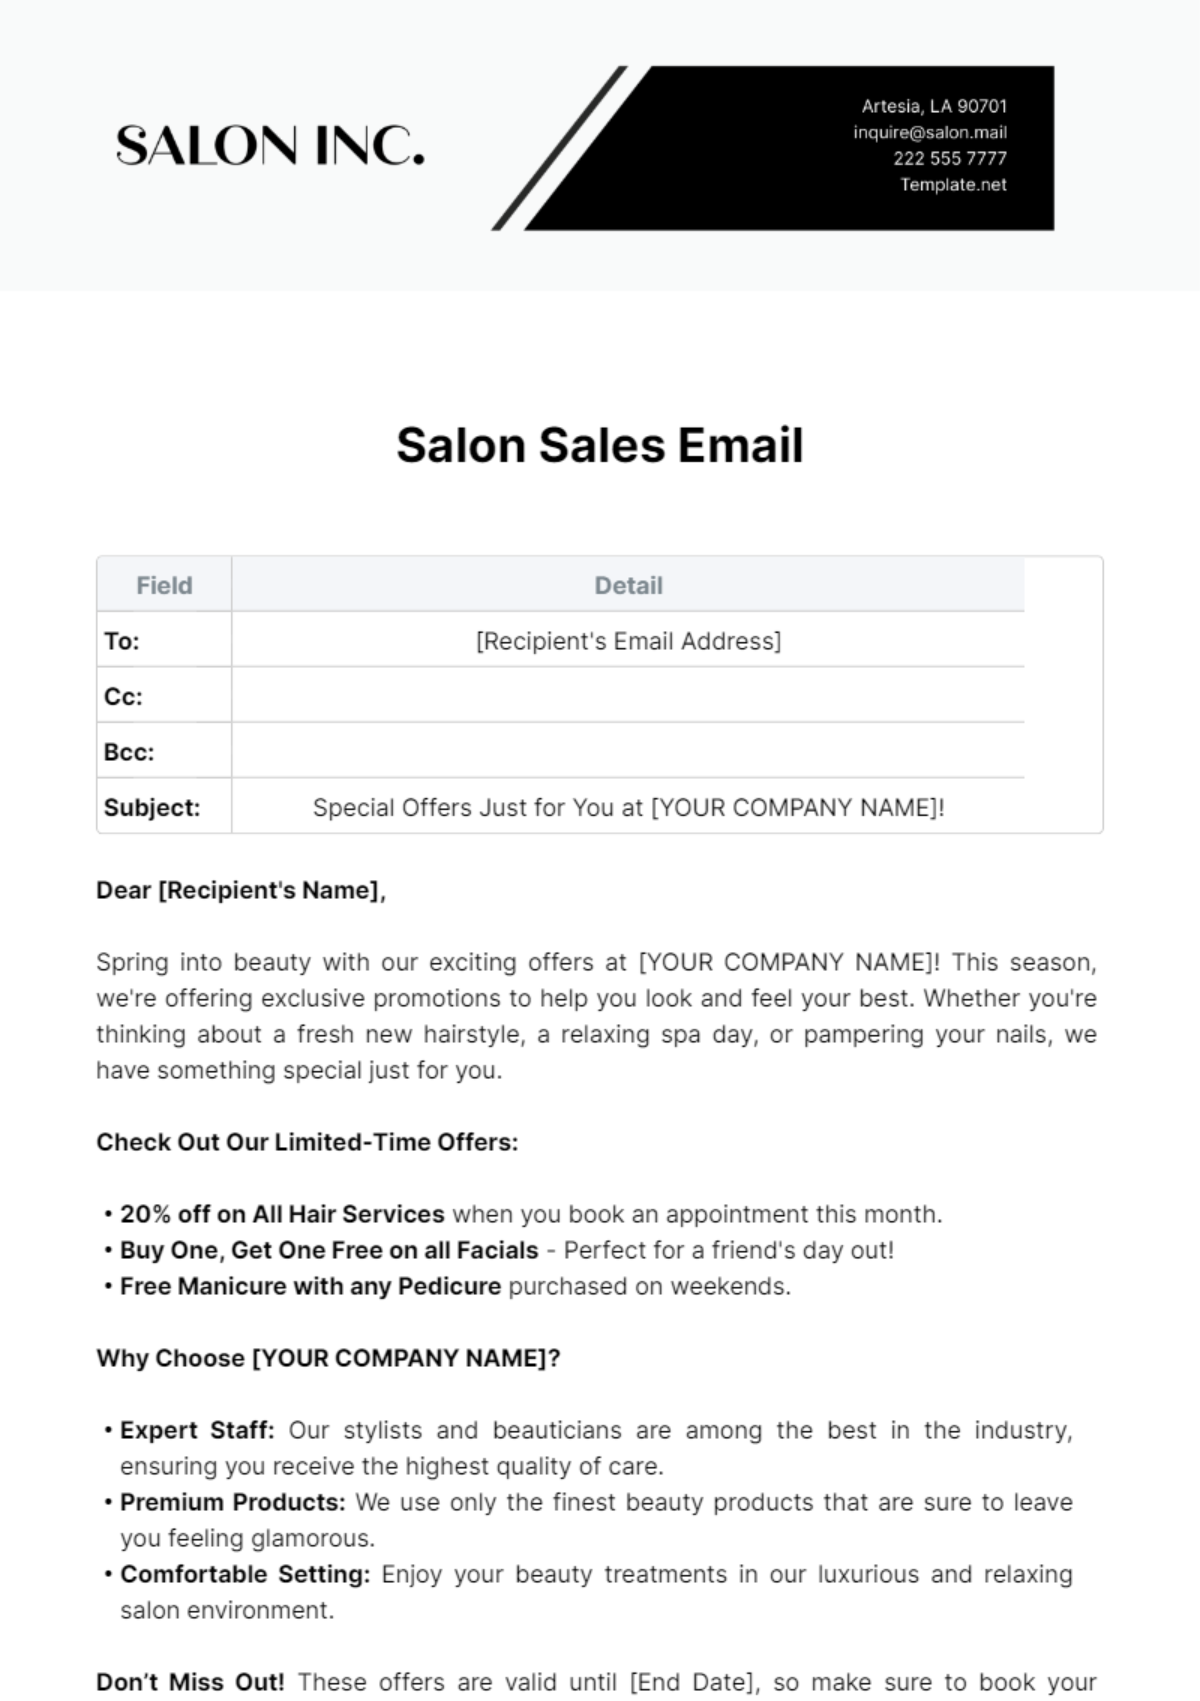 Salon Sales Email Template